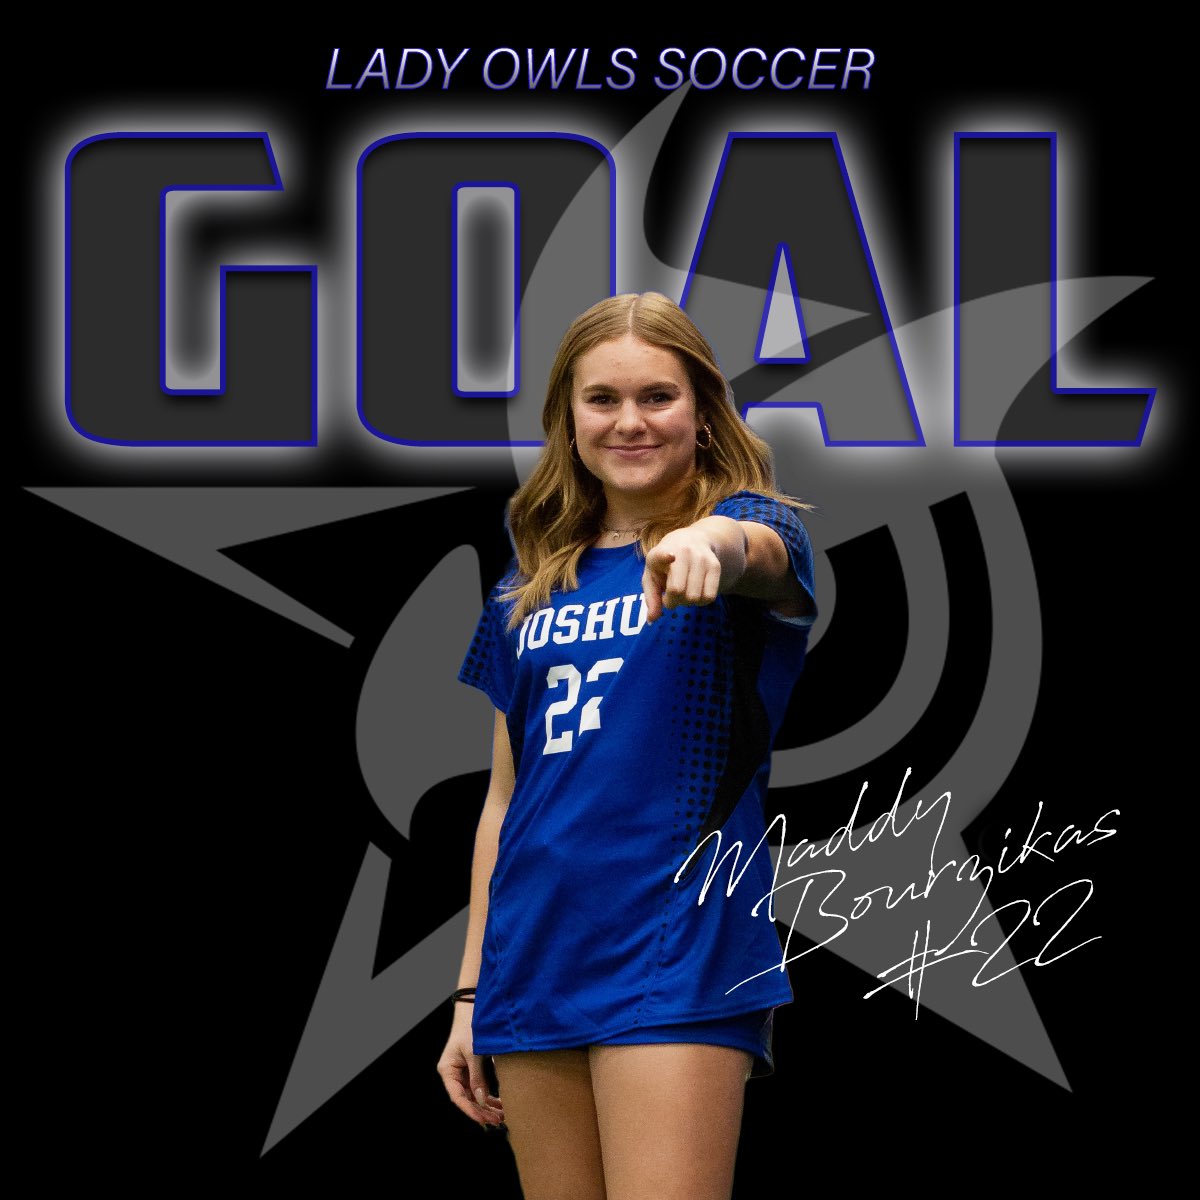 GOAL! Northwest scored a goal and we answered immediately! 4-1 with 12 minutes left. 🦉⚽️💙